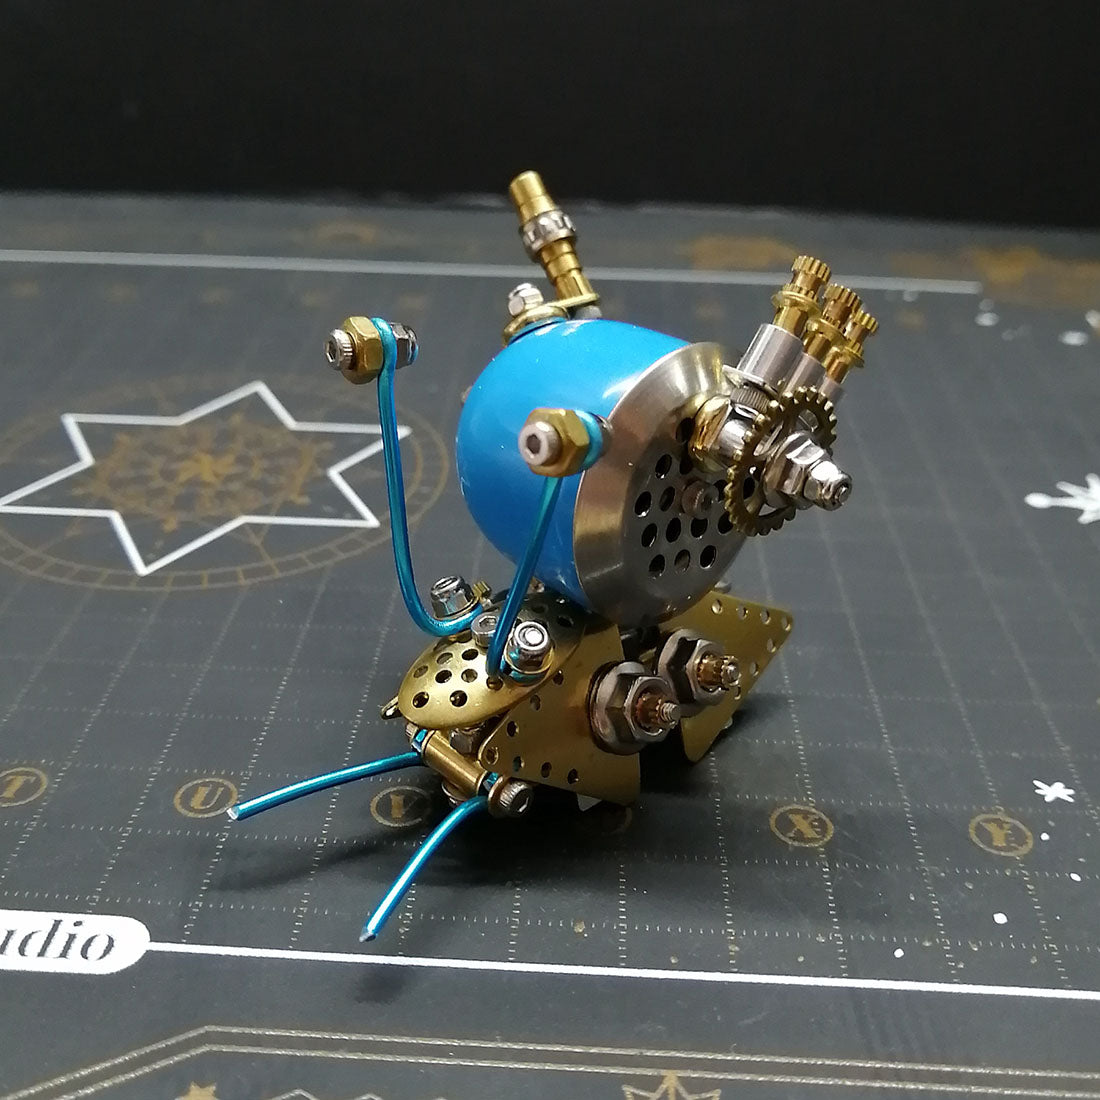 Colorful Steampunk Snail 3D DIY Metal Insect Kits